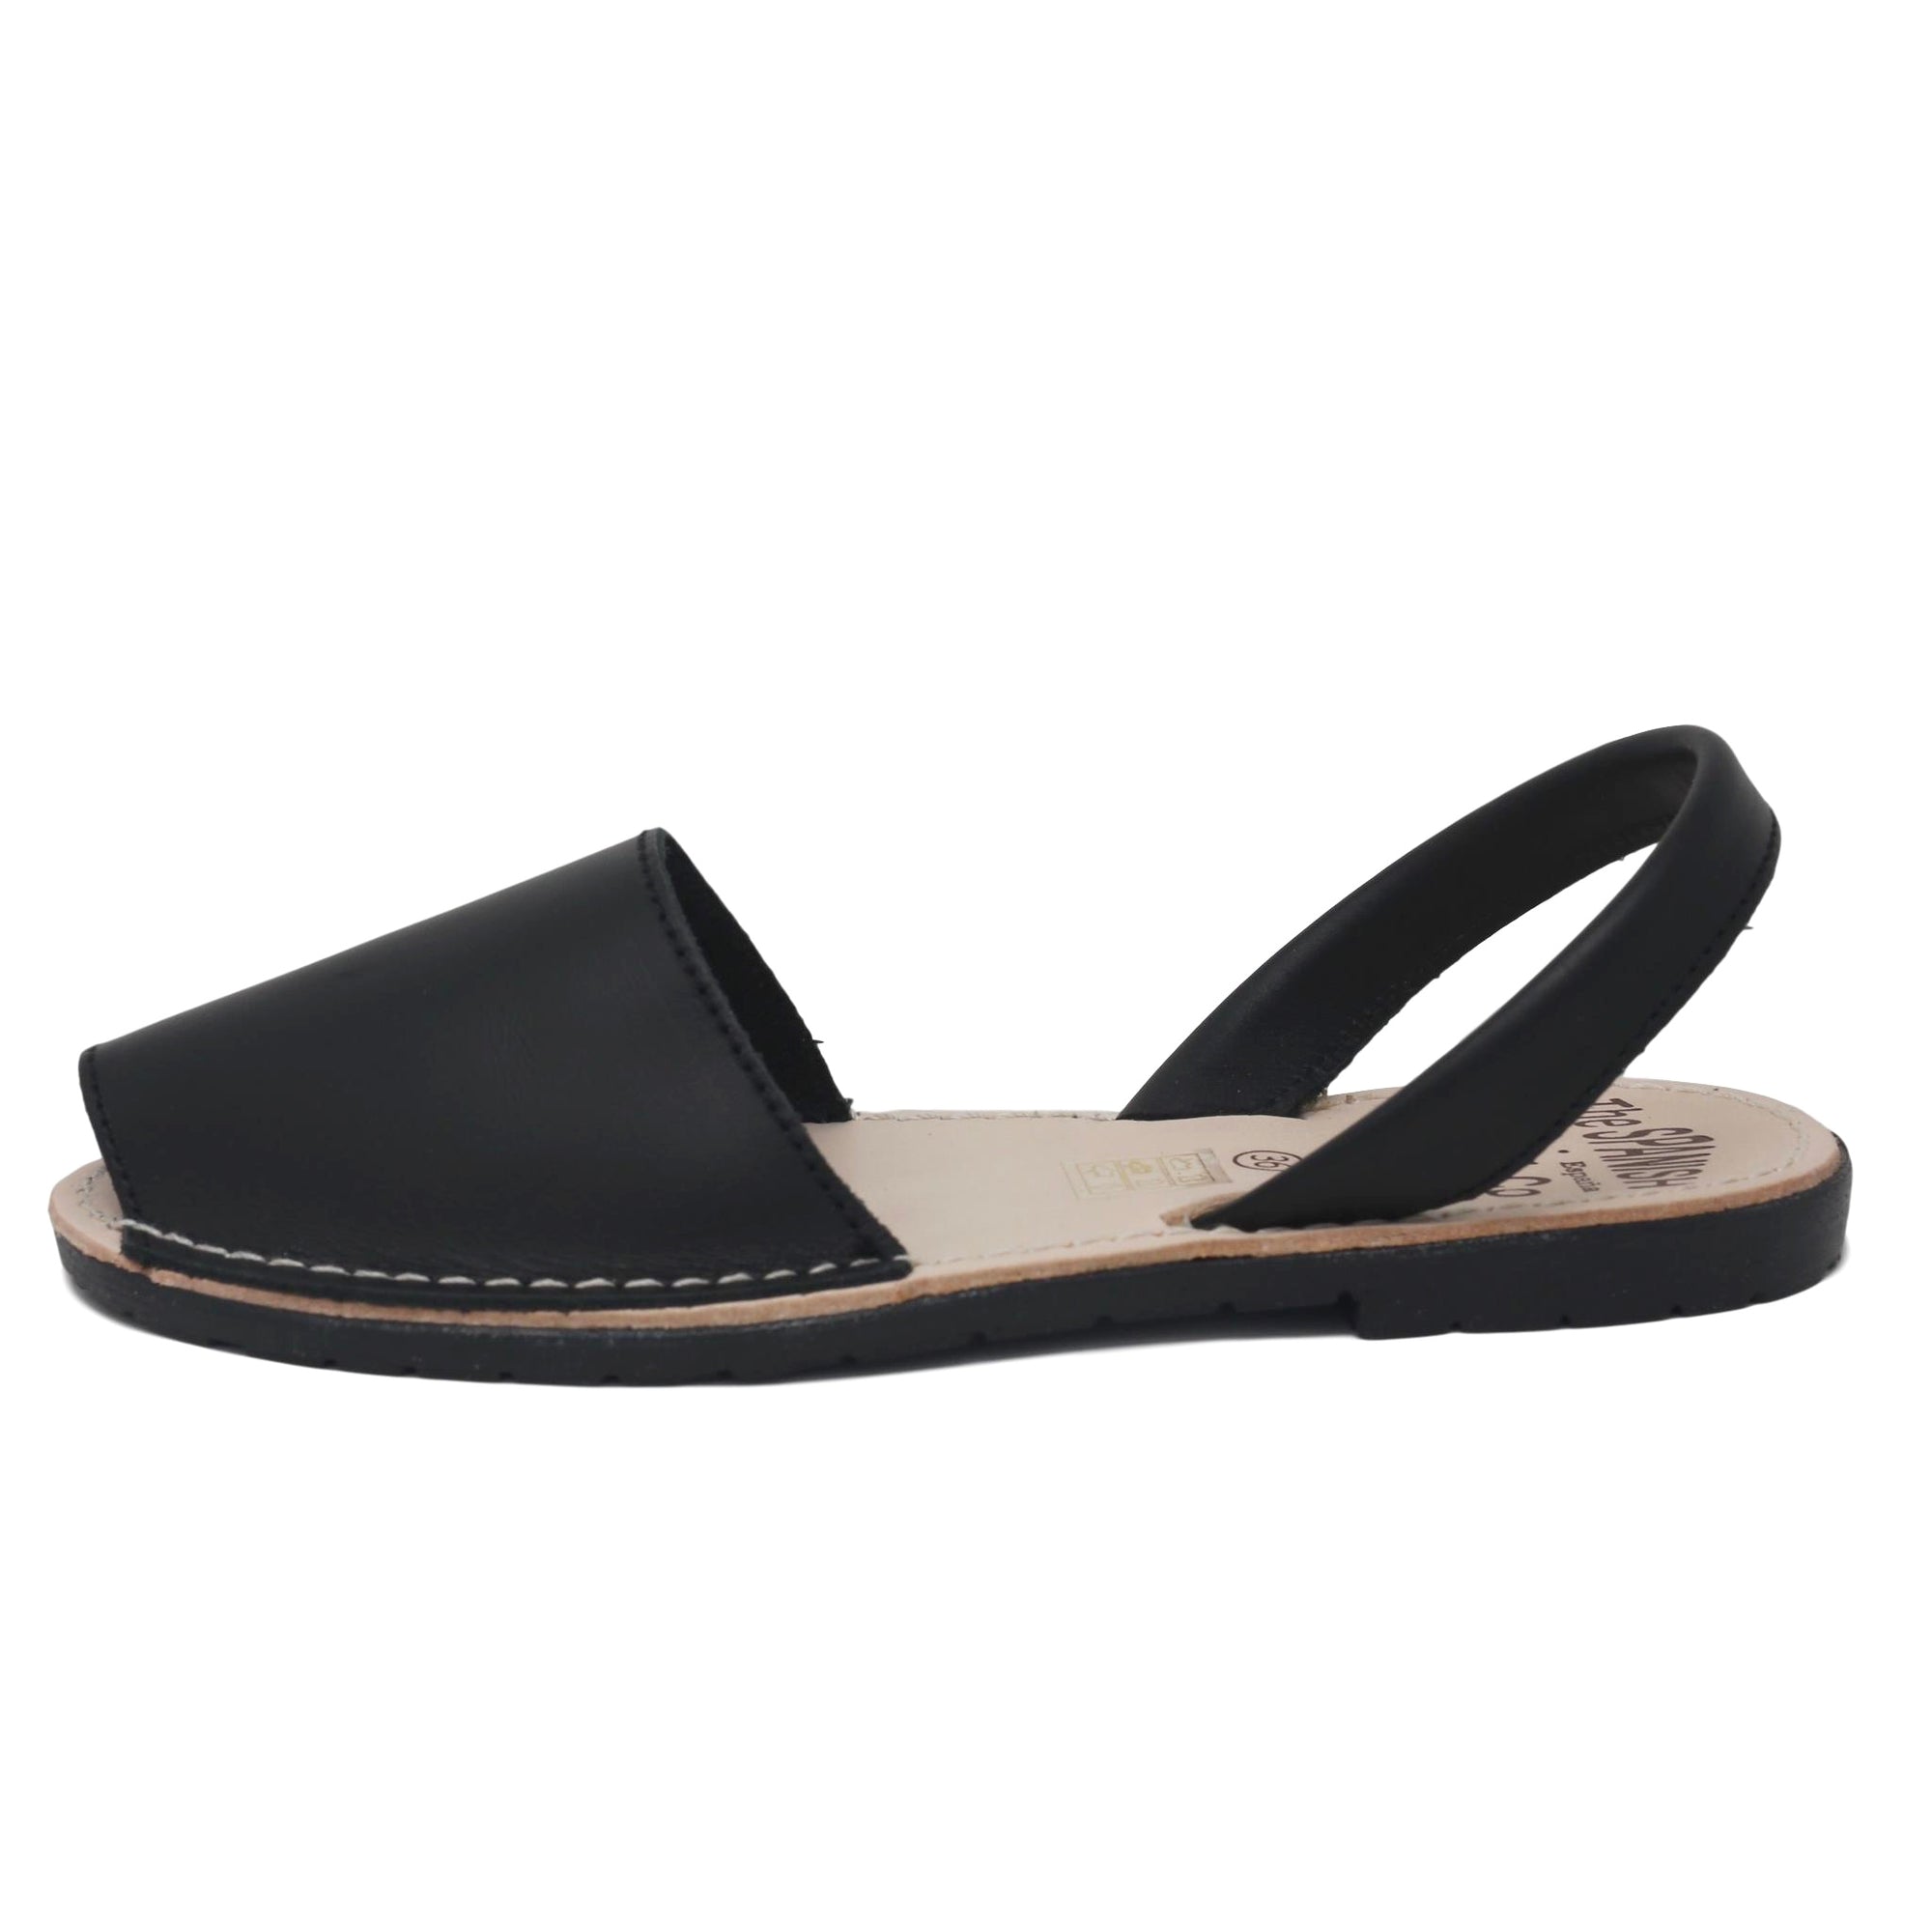 Classic black sandals | Beautiful leather sandals made in Spain